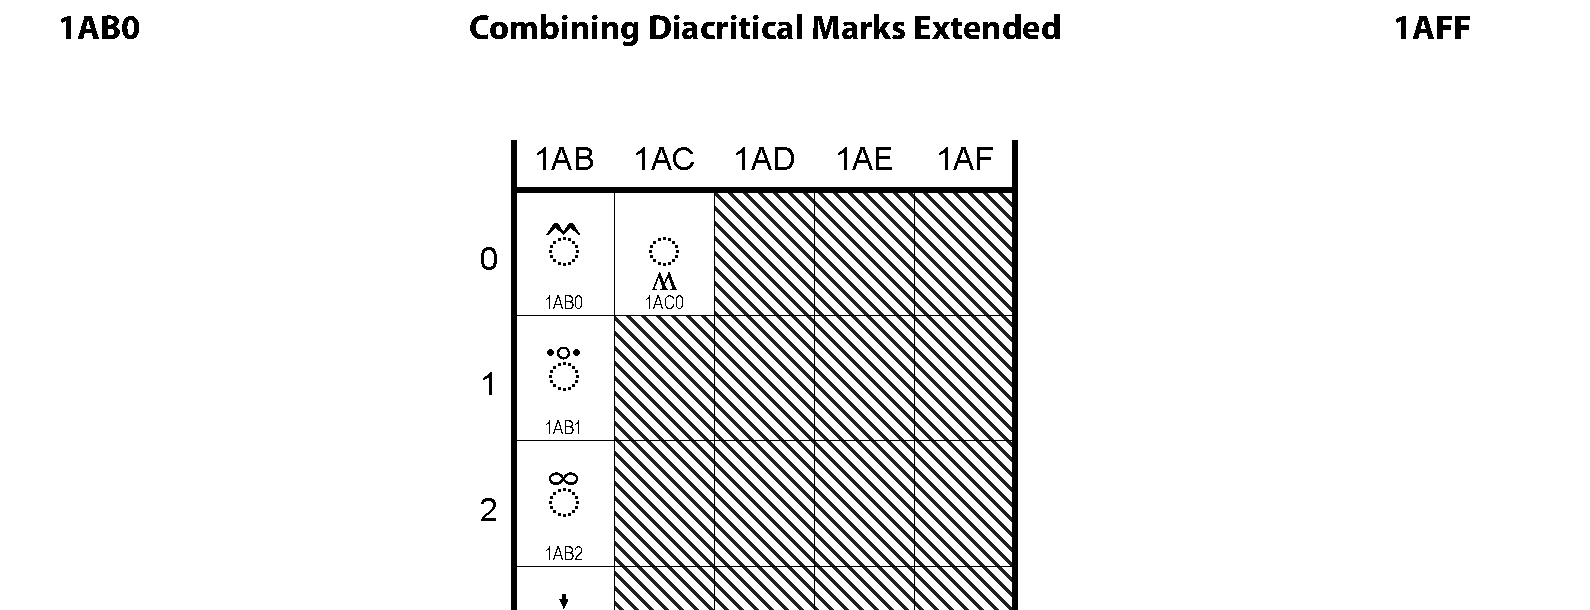 Unicode - Combining Diacritical Marks Extended